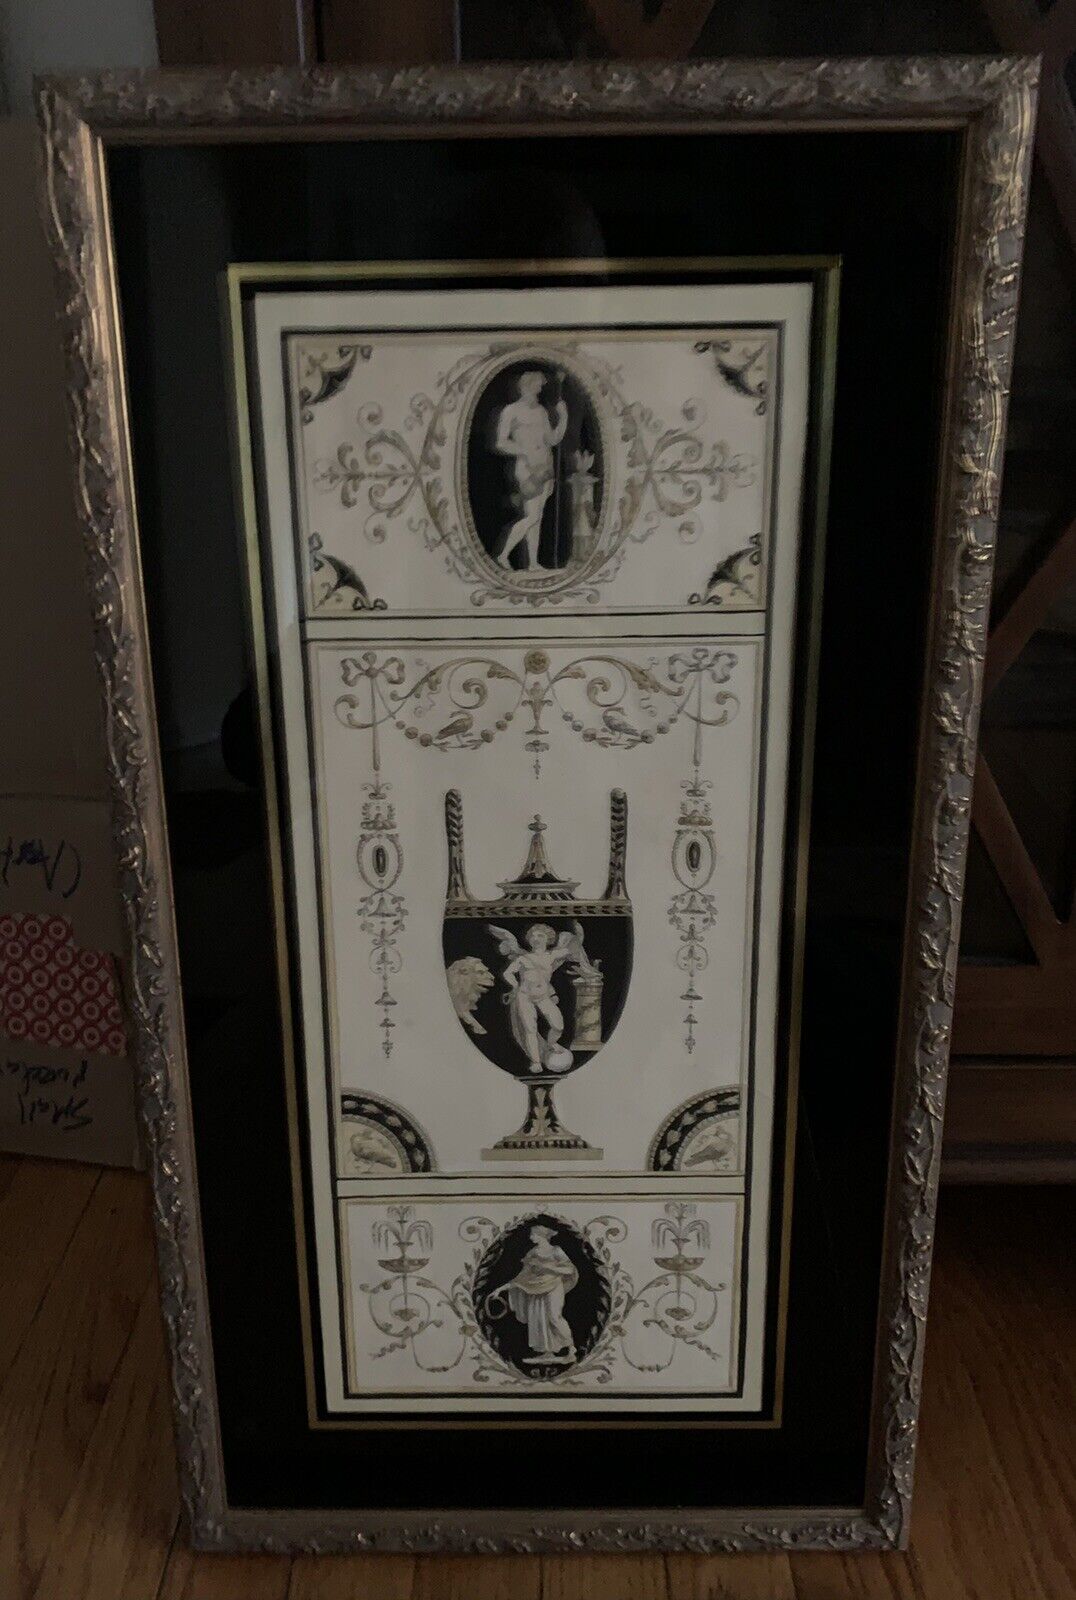 THREE ANTIQUE 18th CENTURY ITALIAN HAND-COLORED ENGRAVINGS - MATTED AND FRAMED Без бренда - фотография #9